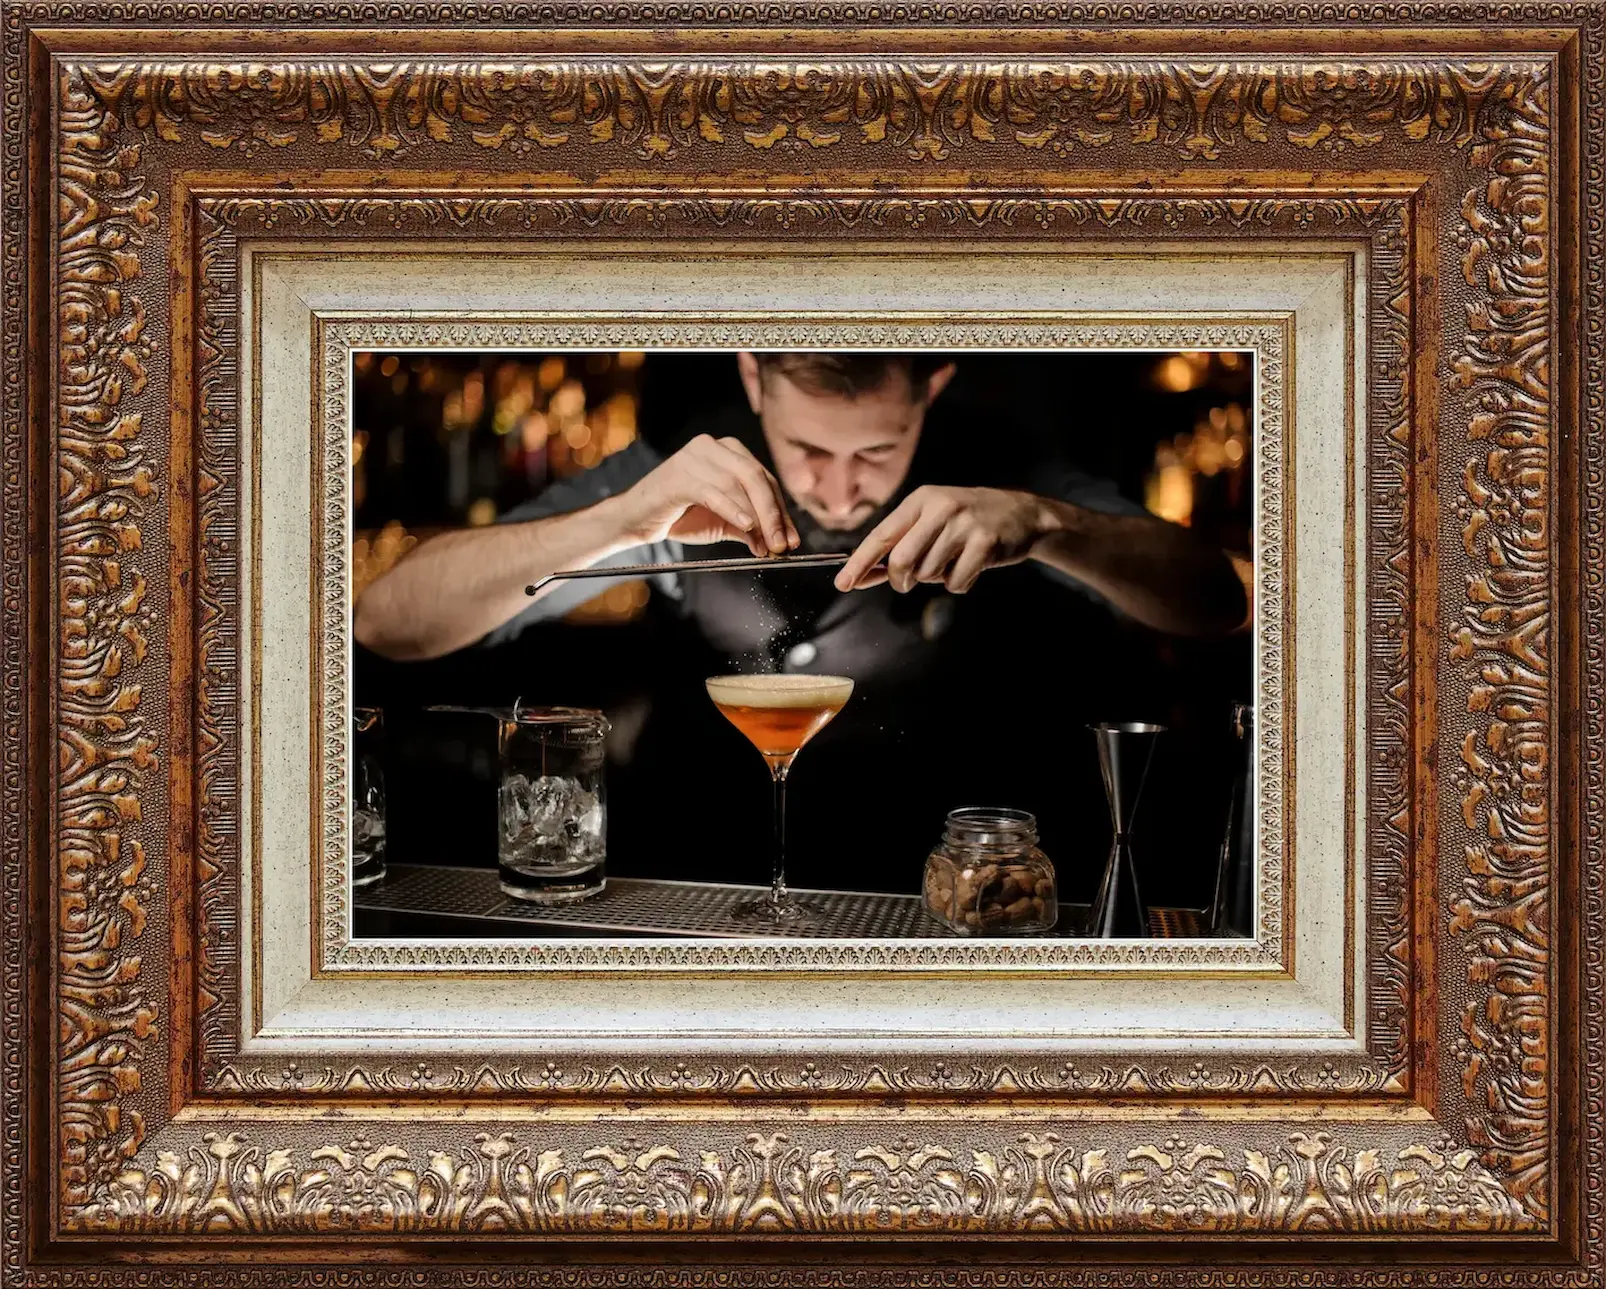 Image of a mixologist hired for a party presenting a cocktail